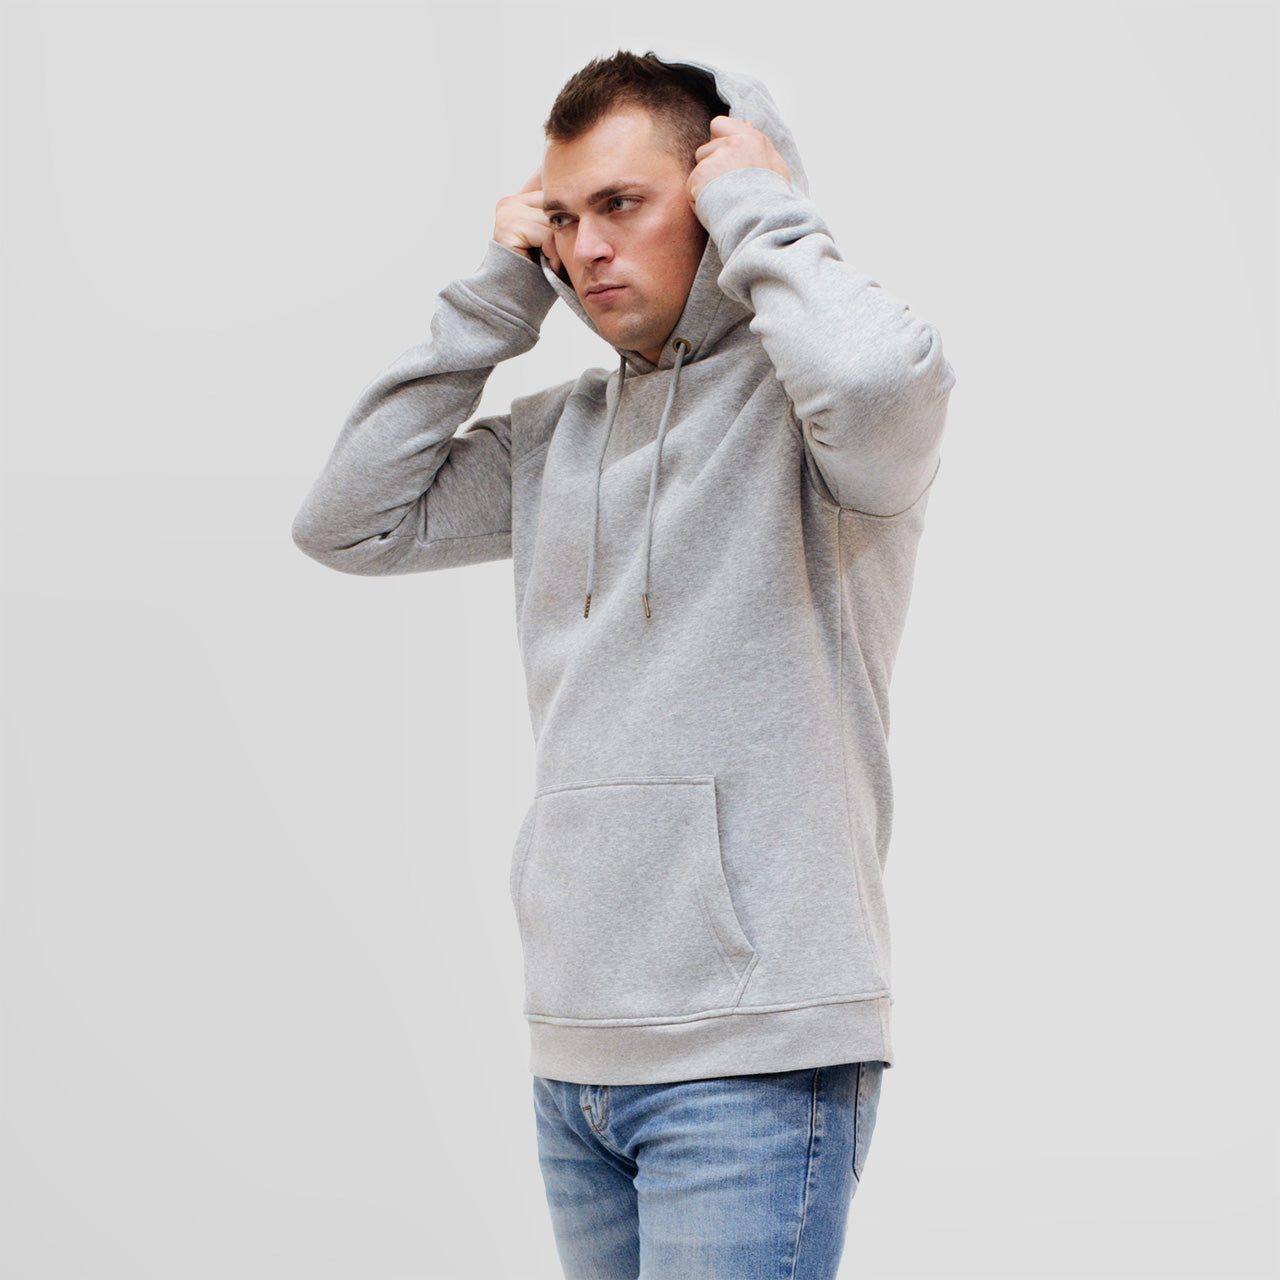 Gray Pullover Hodie for Tall Slim Men